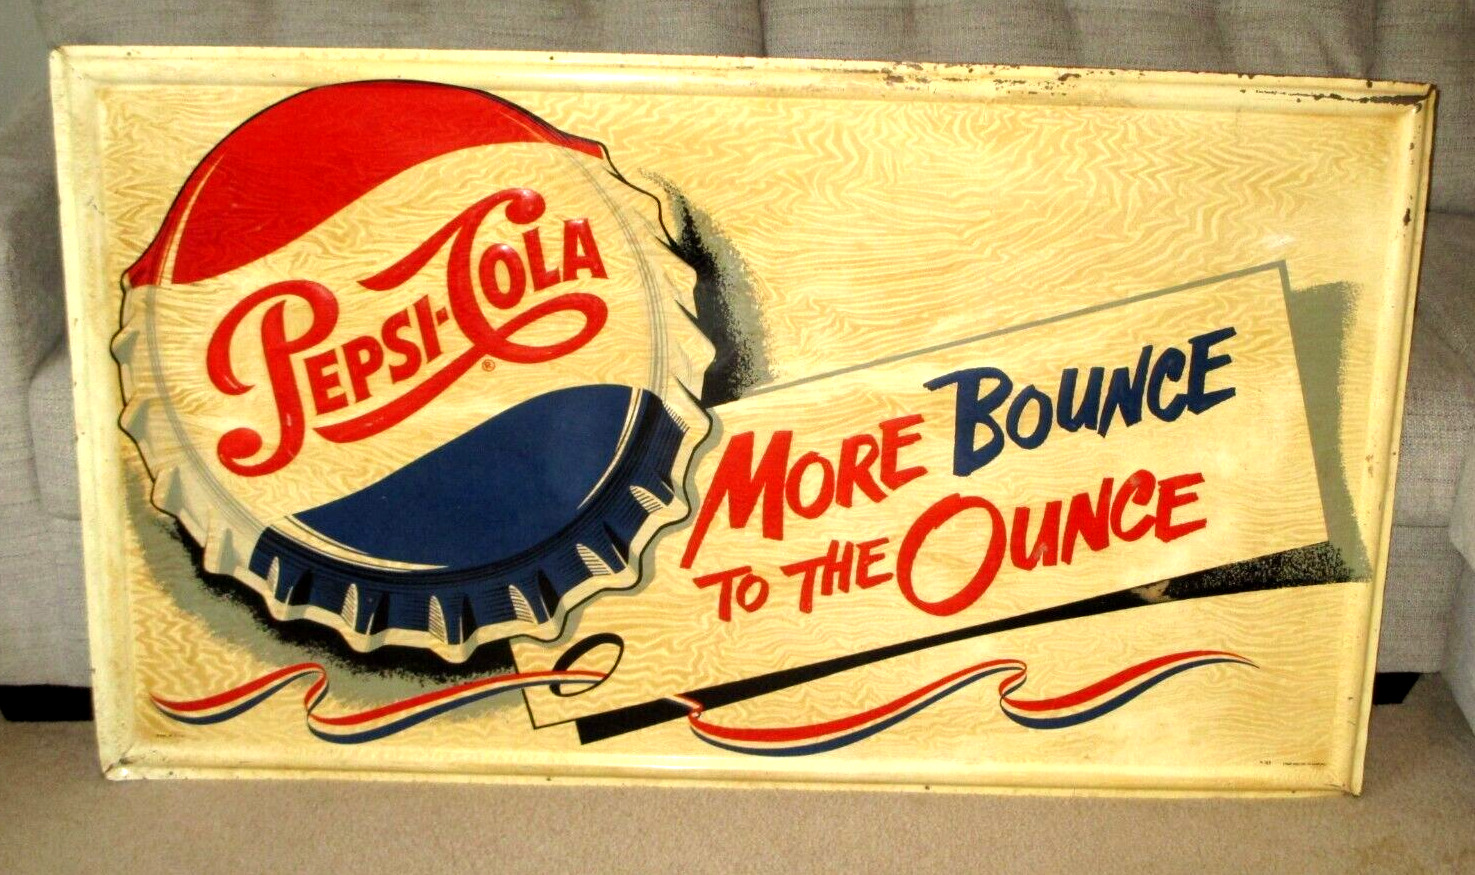 VINTAGE PEPSI COLA SODA SIGN- MORE BOUNCE TO THE OUNCE- STOUT SIGN-ST LOUIS 57\